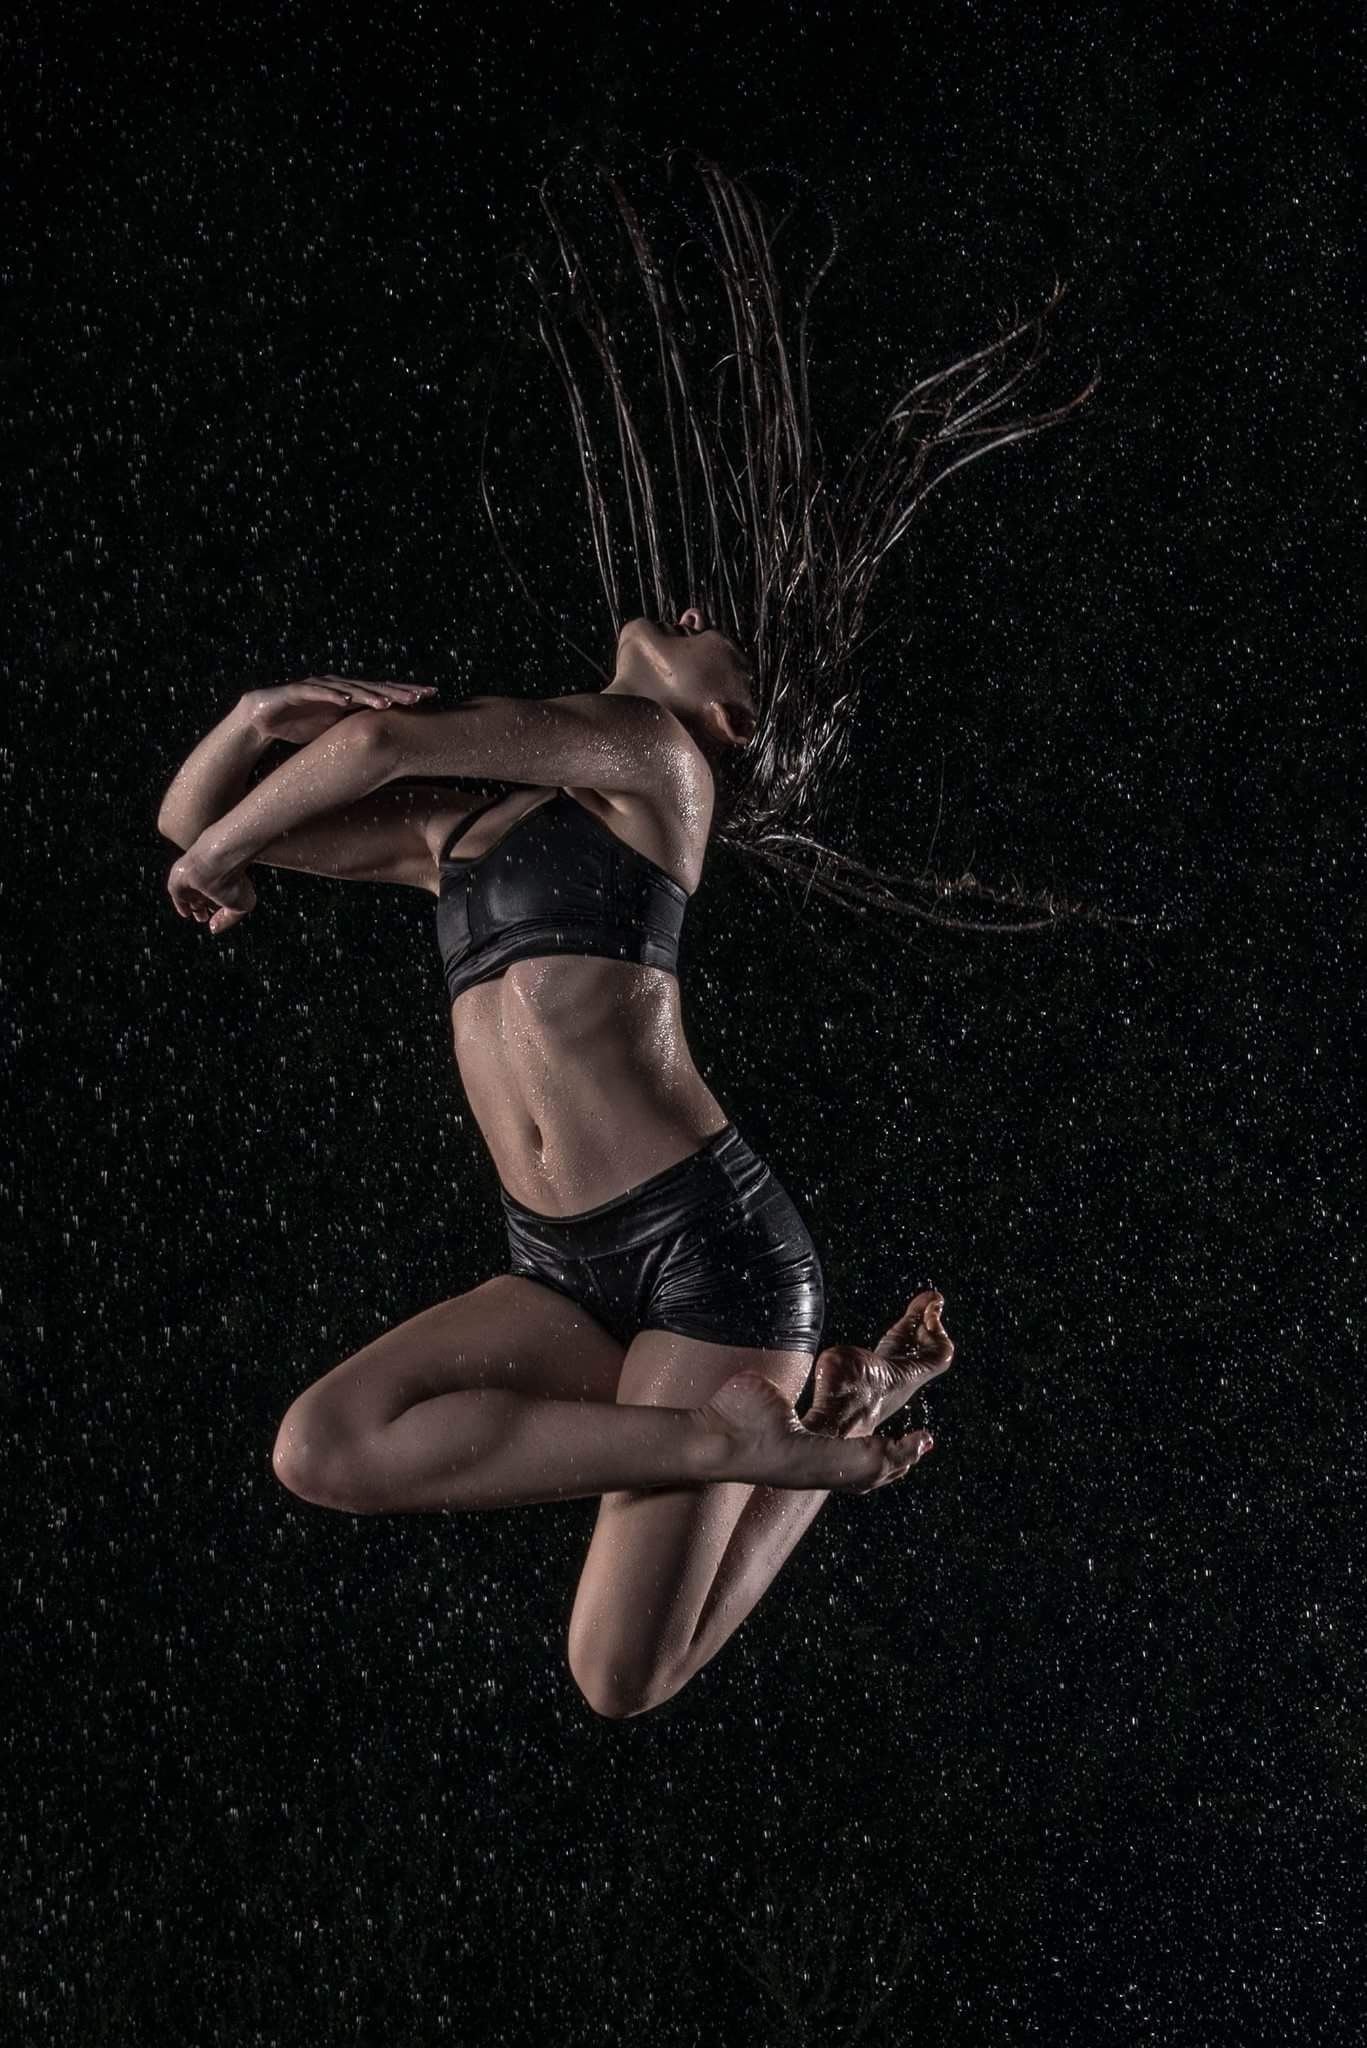 Contemporary Dance: Water, Dancing in the rain, Fluidity and improvisational movement. 1370x2050 HD Wallpaper.